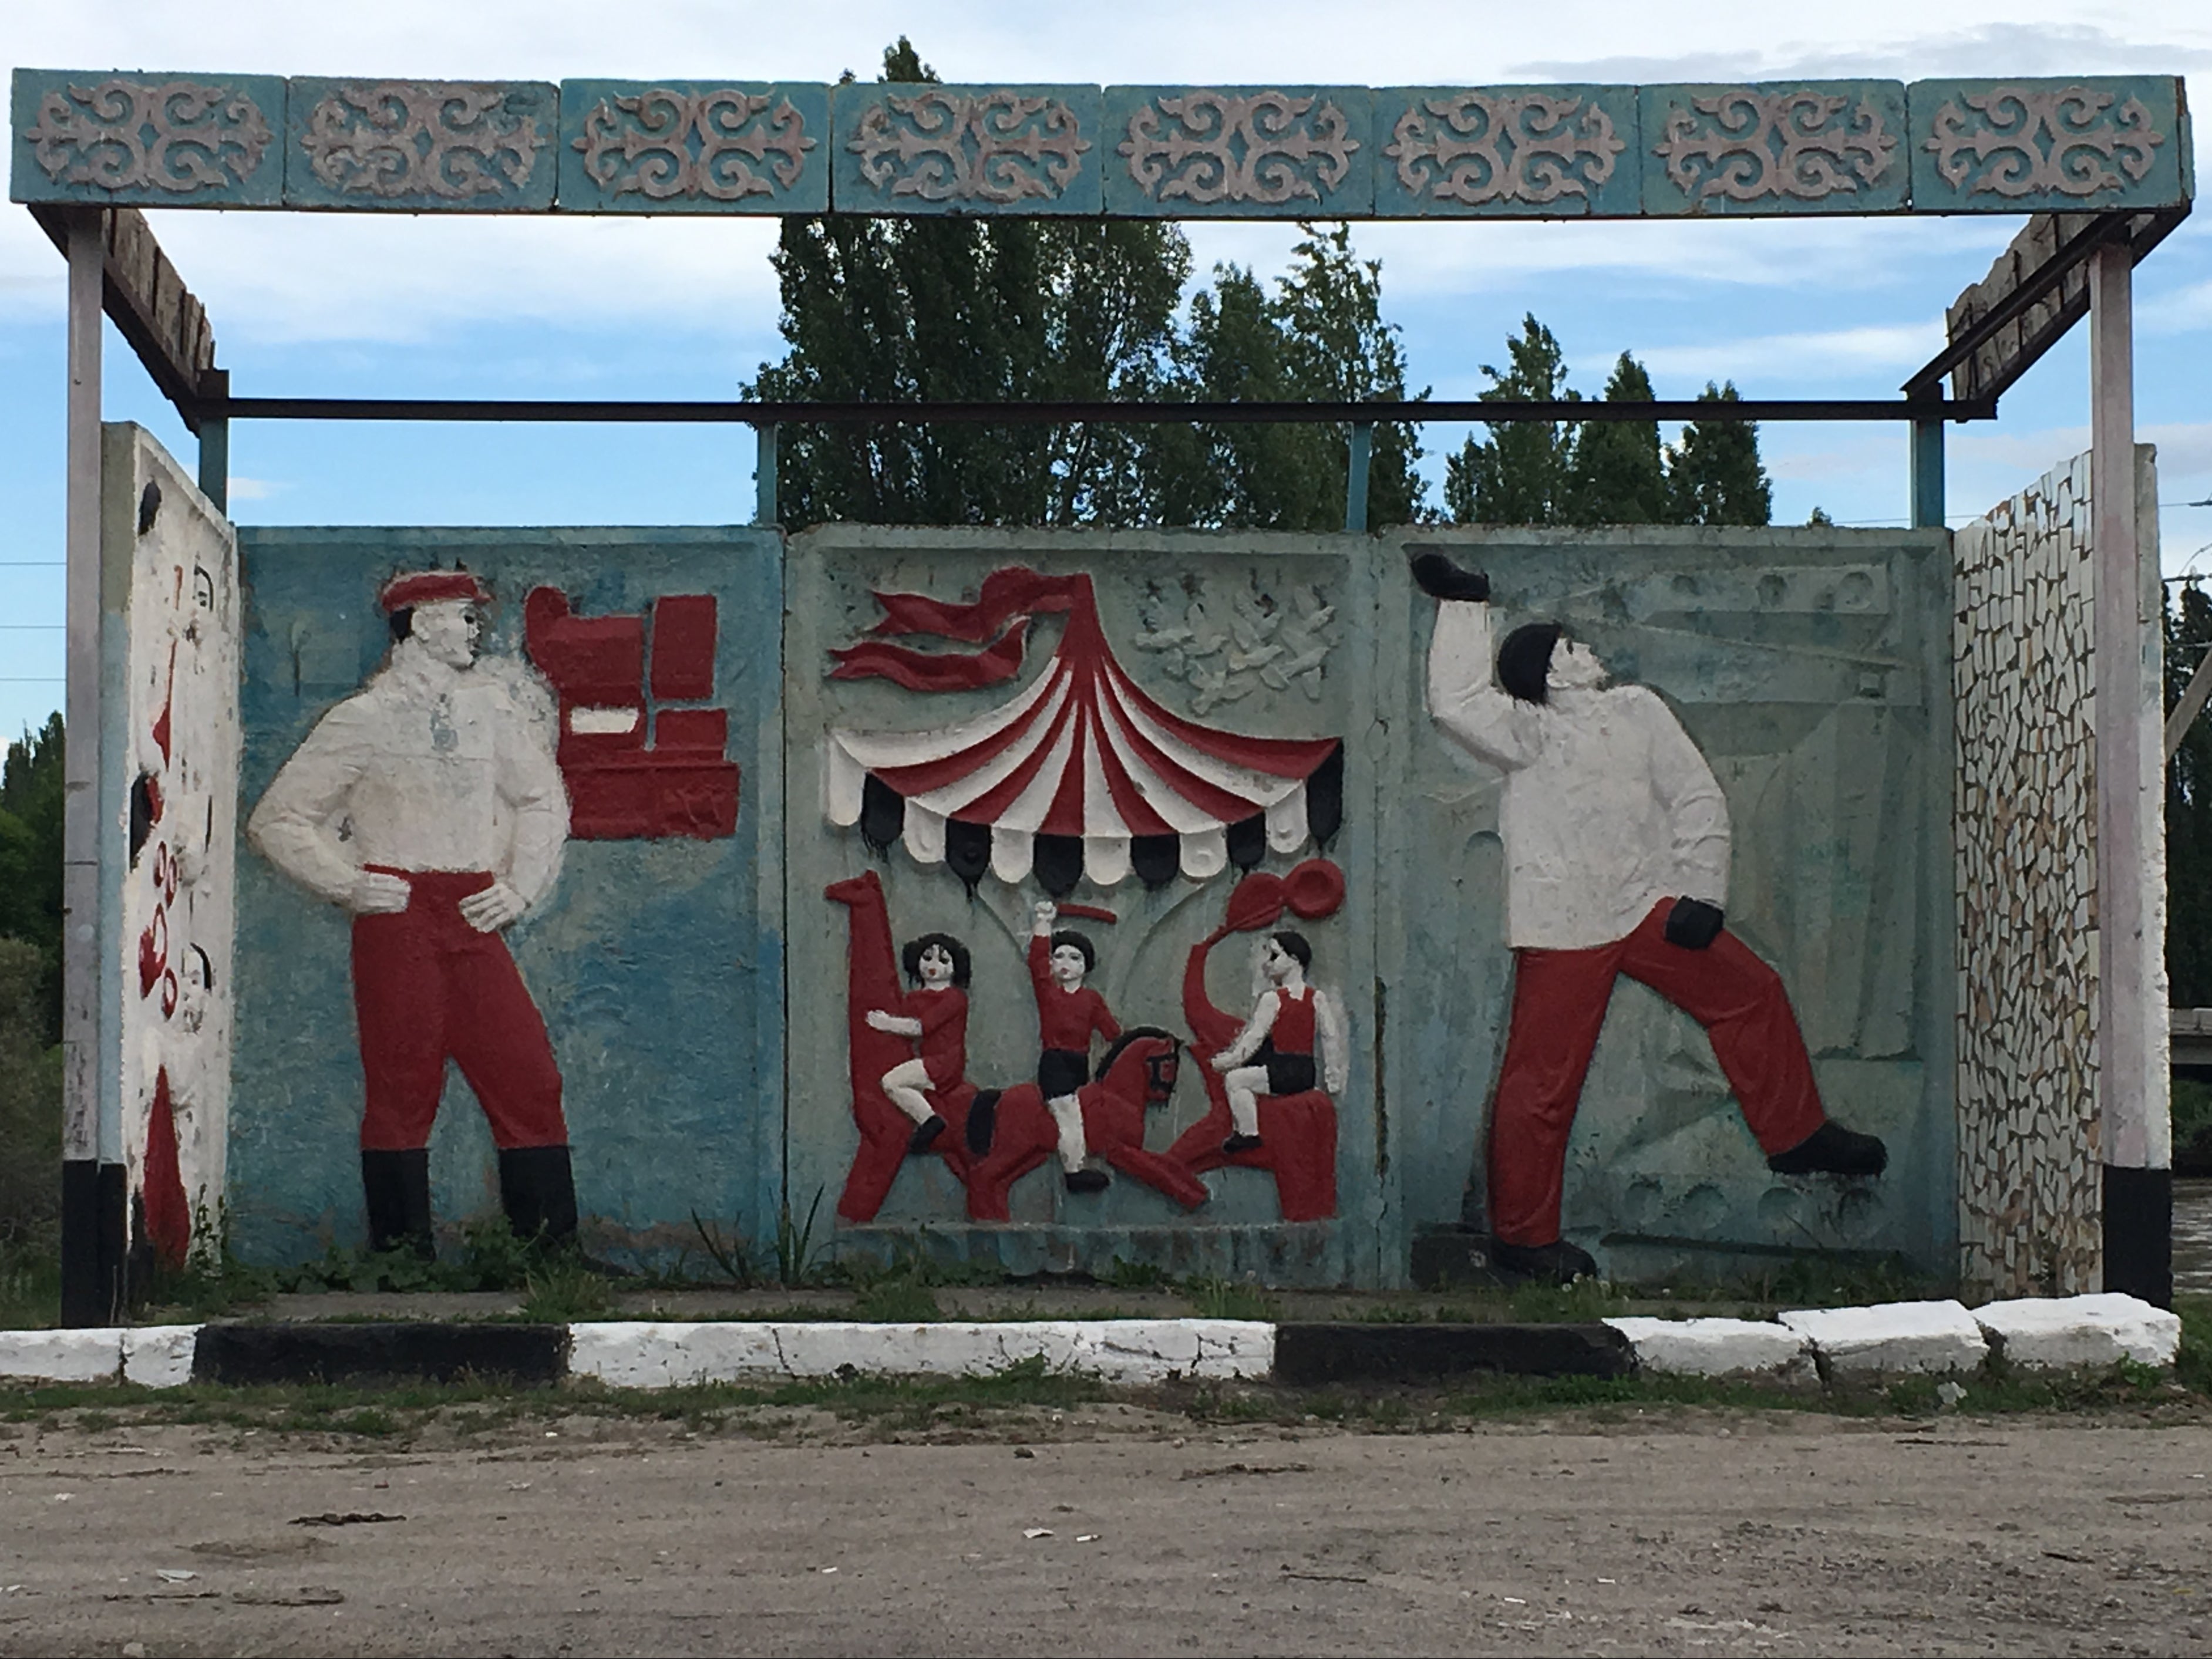 ‘Feel nomads, feel happiness’ – the slogan of the Kyrgyz Republic, which is noted for its decorative bus shelters